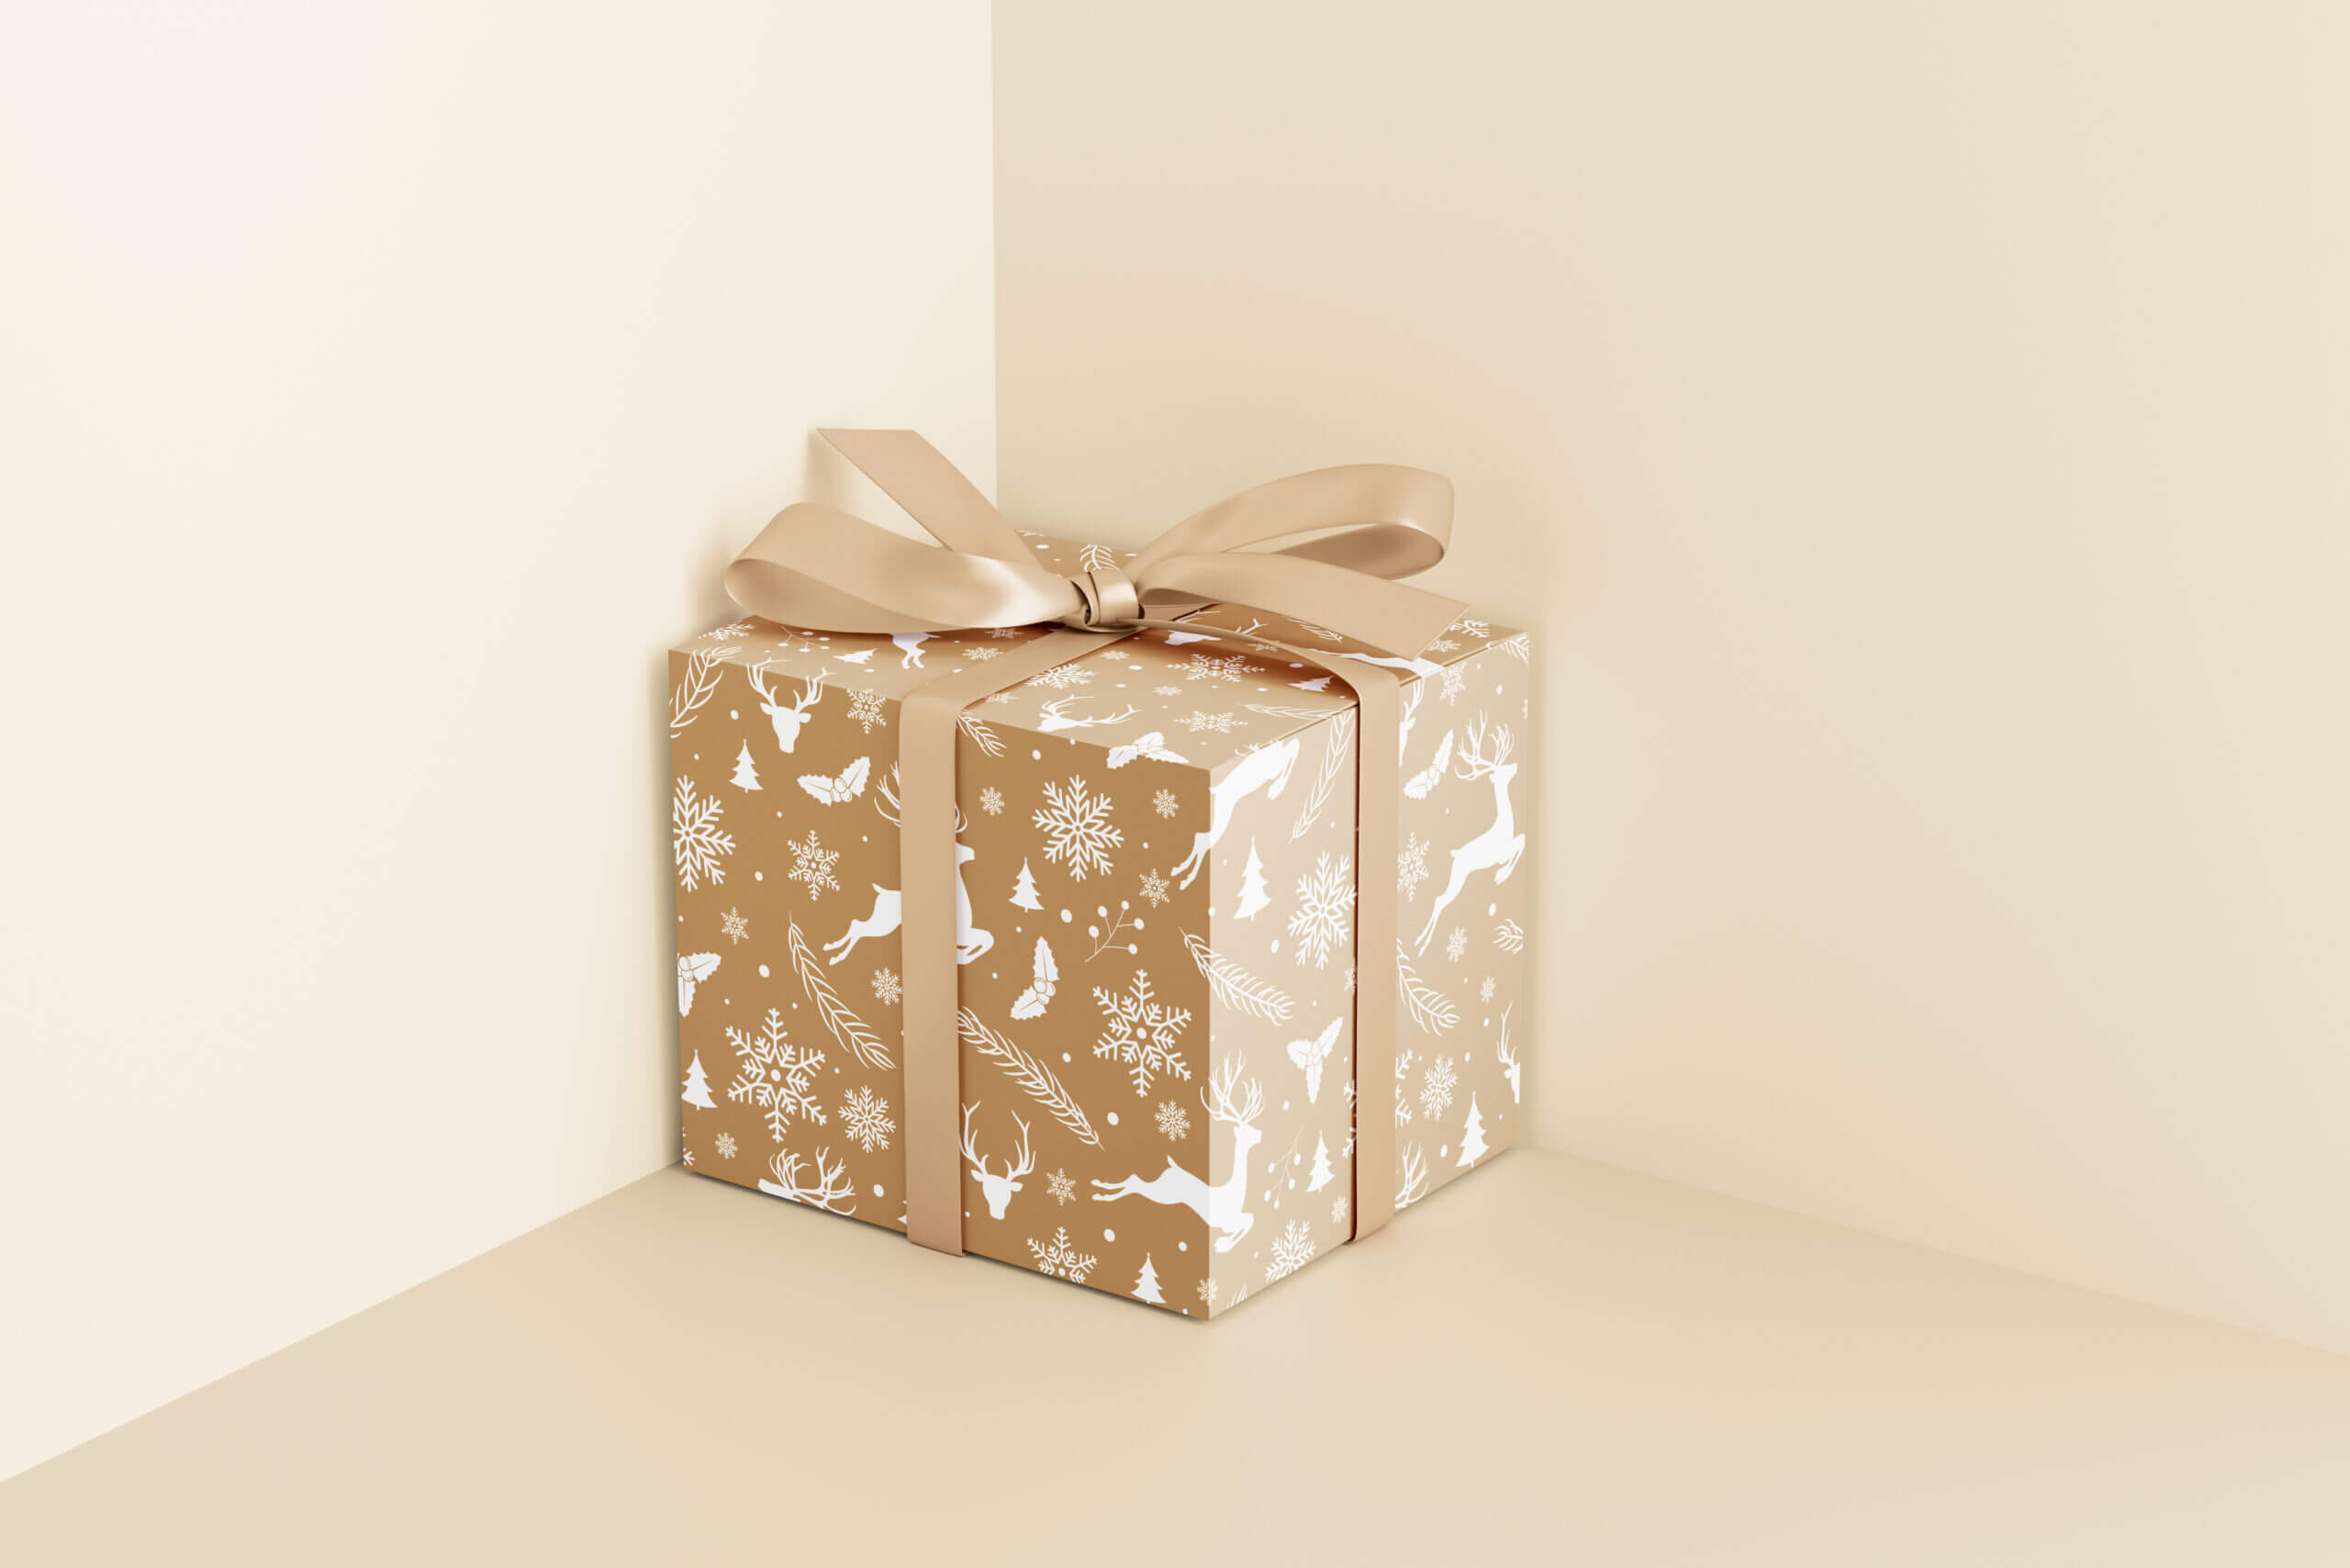 5 Free Wrapped With Ribbon Square Gift Box Mockup PSD Files2